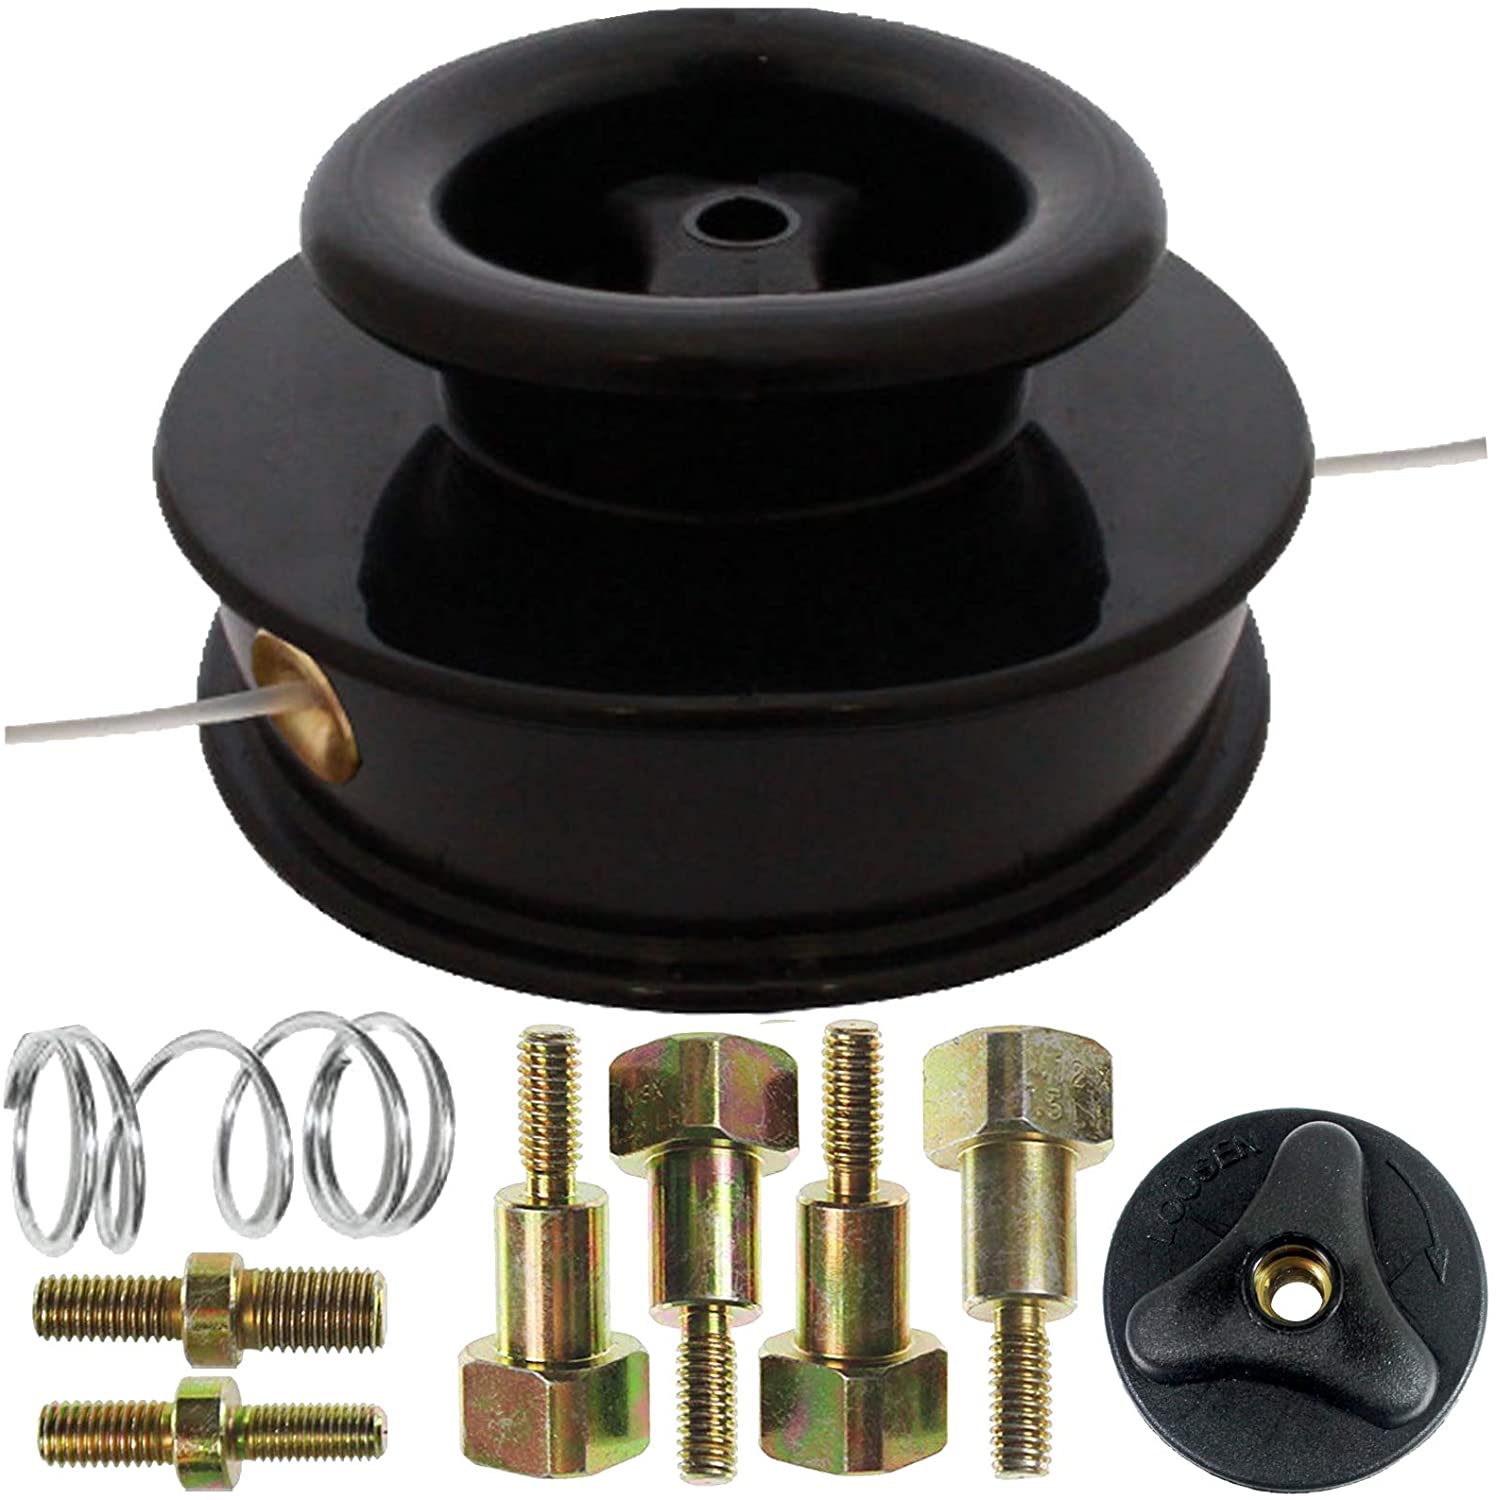 Dual Line Manual Feed Head with Bolts for ECHO Strimmer/Trimmer/Brushcutter